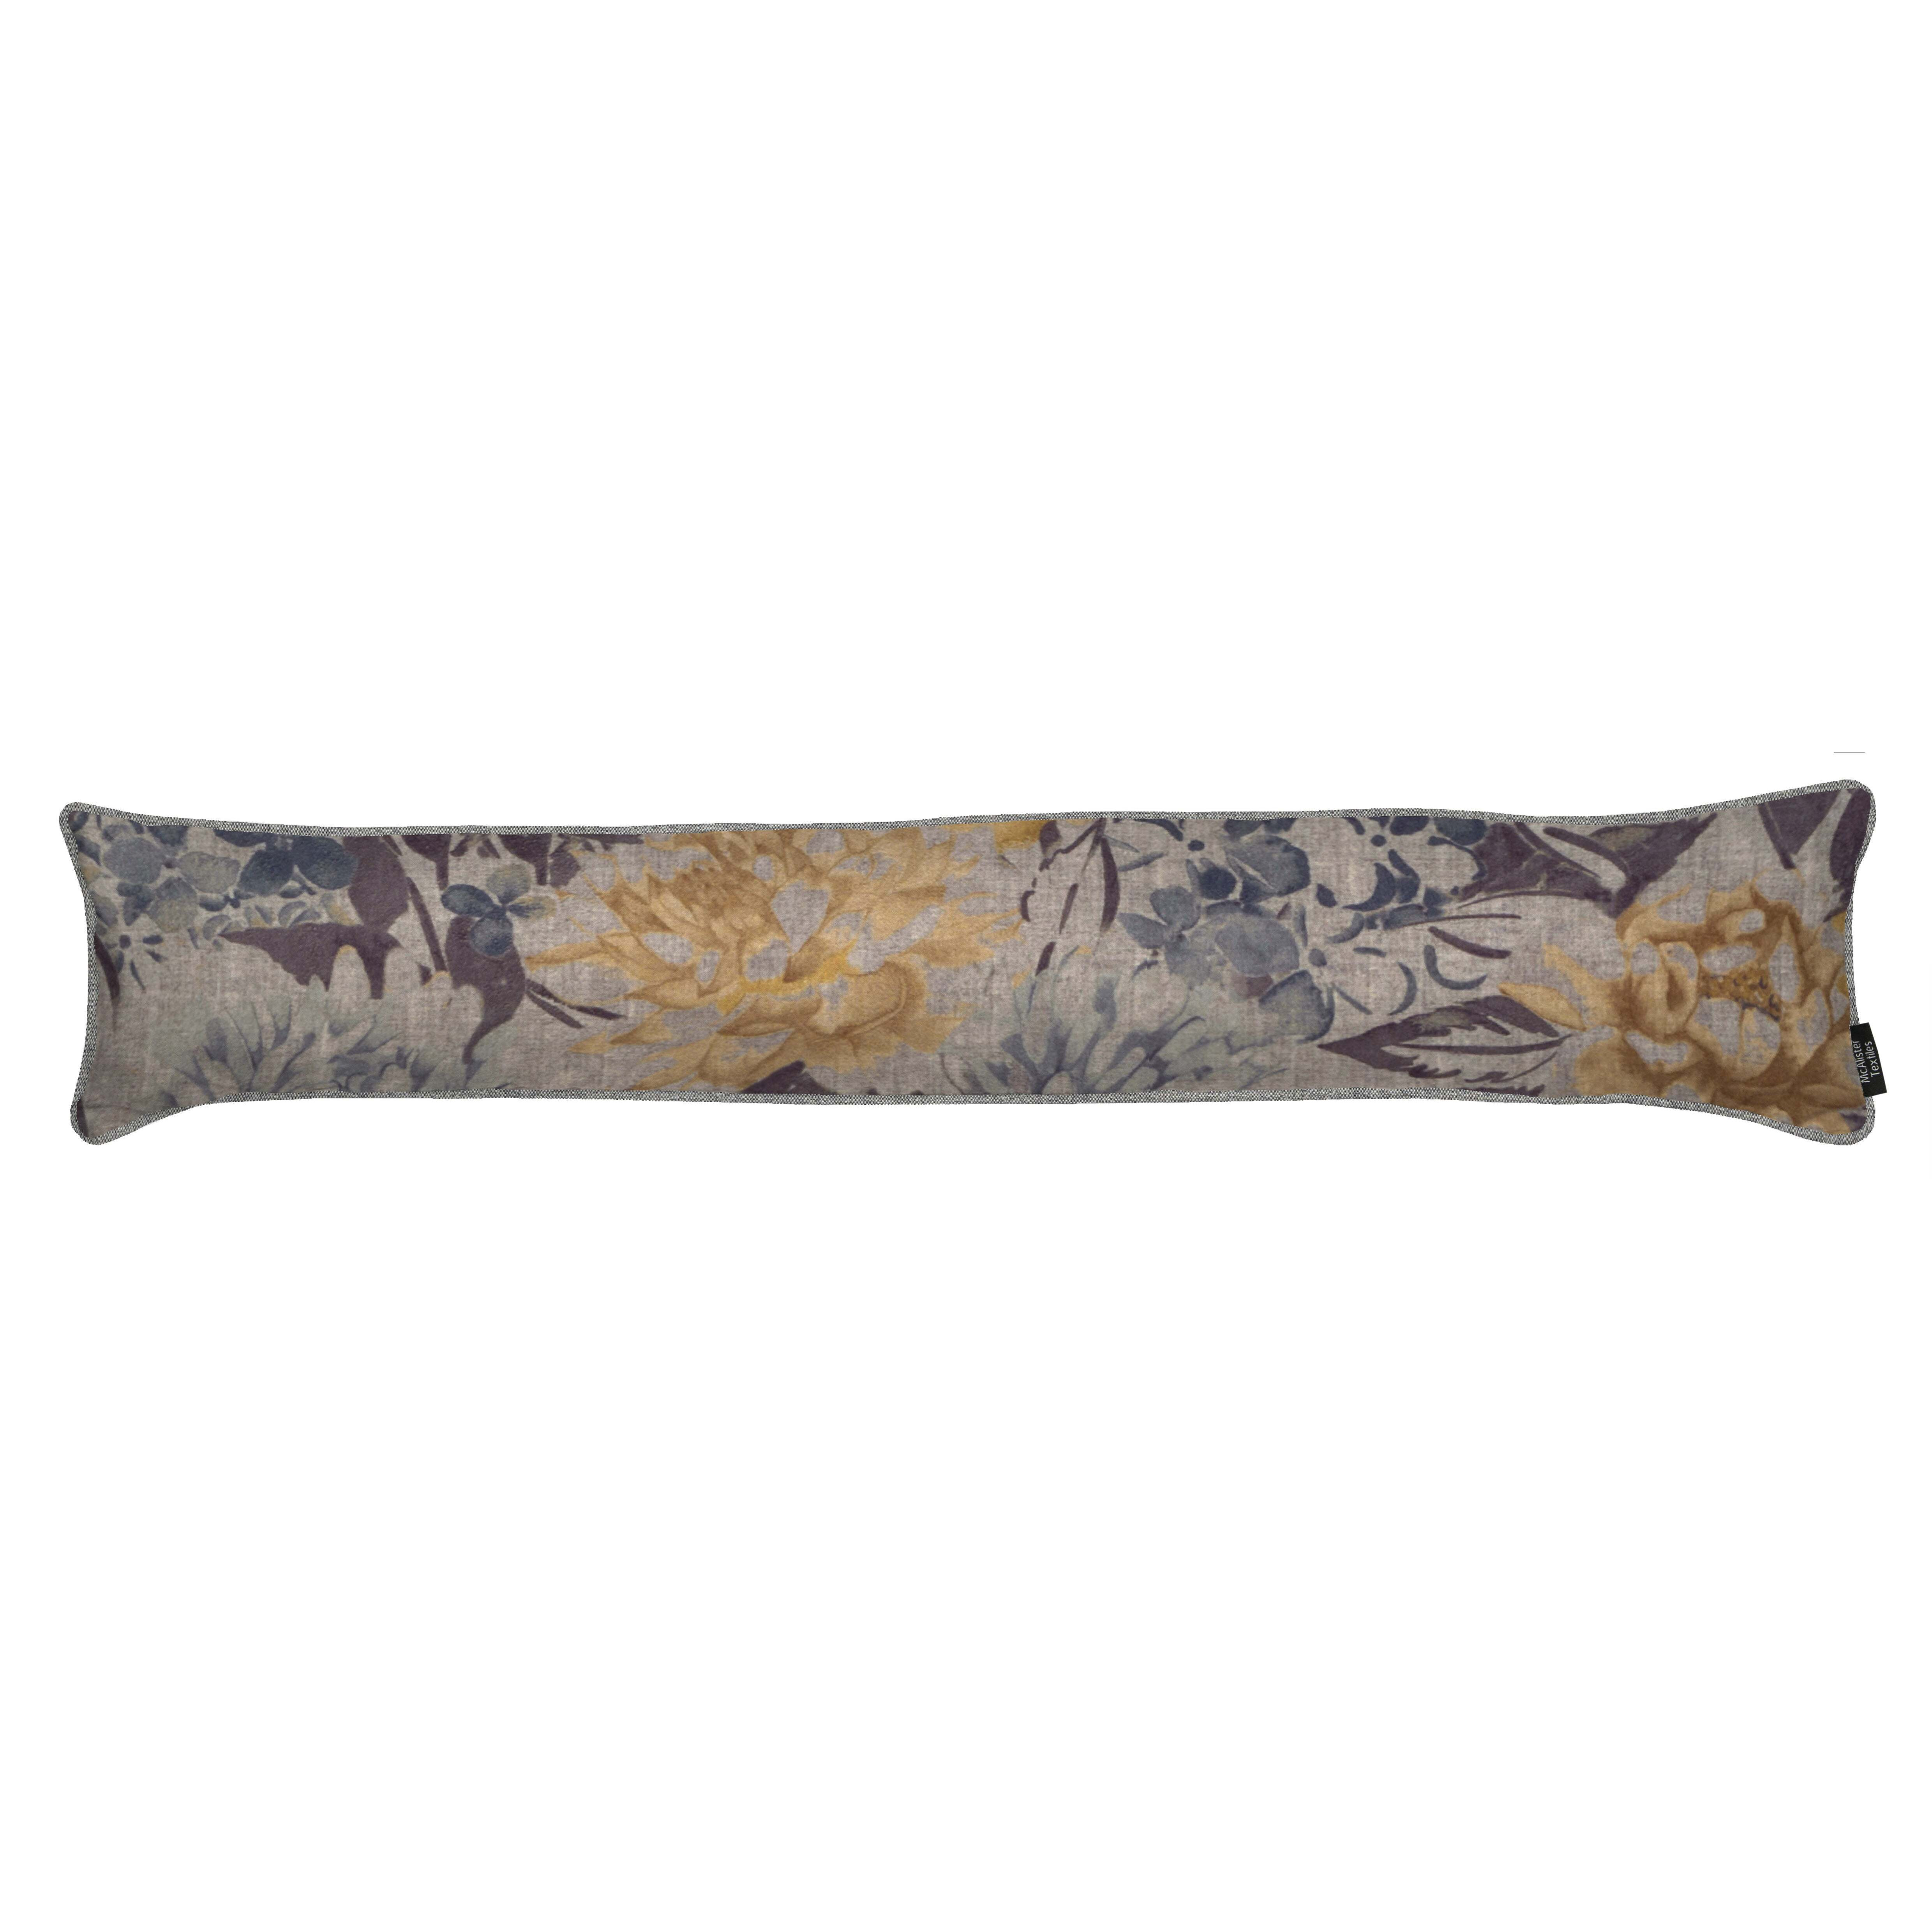 Blooma Blue Grey and Ochre Floral Draught Excluder, 18cm x 80cm